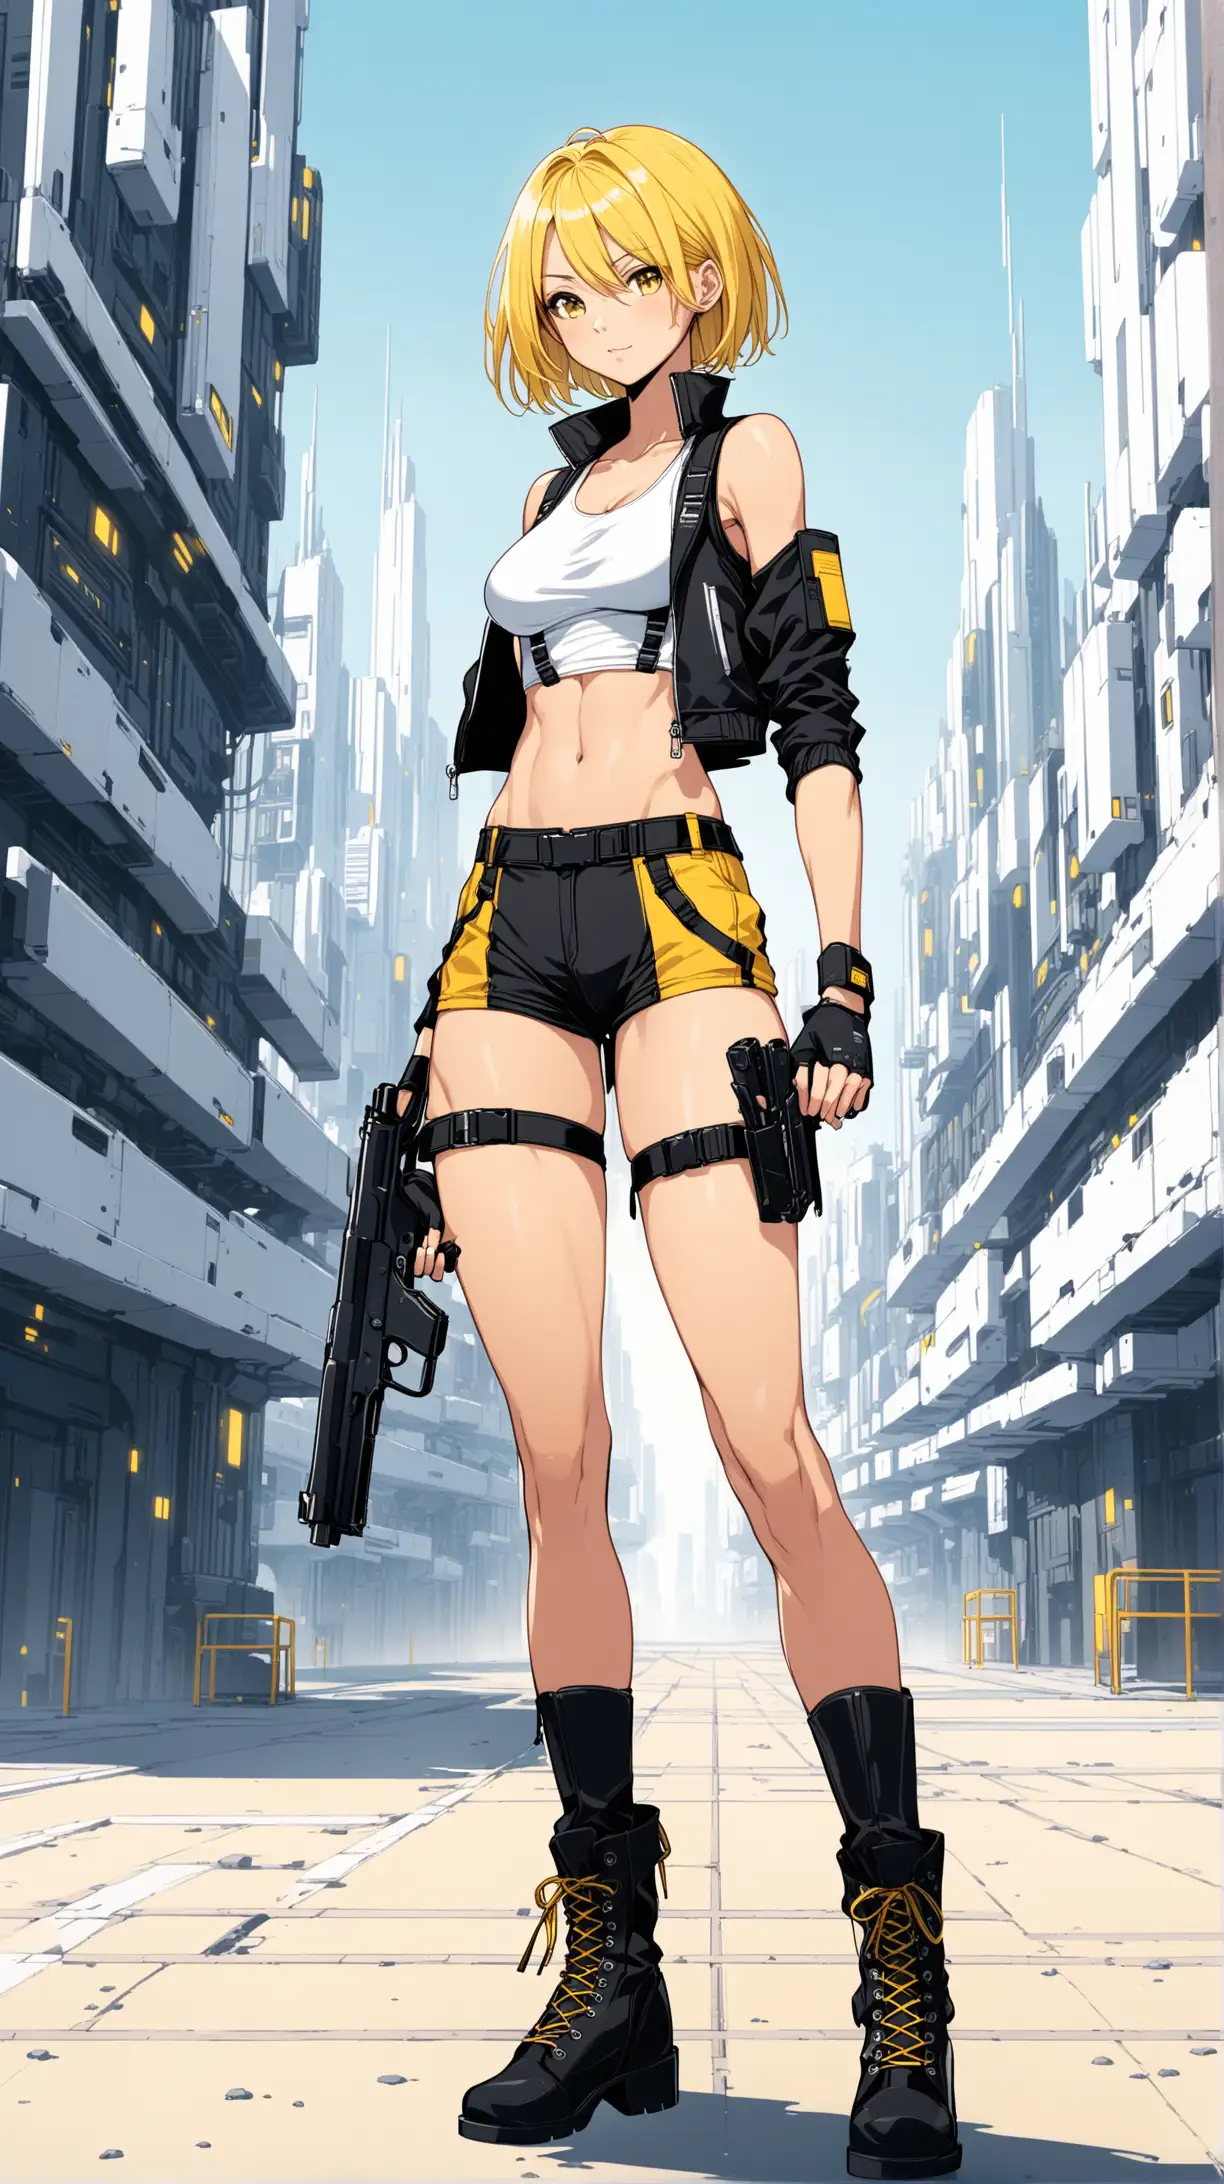 sexy fit 24 year old hero girl, short chin length yellow hair, posing with handguns in futuristic town, super skinny toned body, wearing black members only jacket, short white tank top, sexy midriff, wearing suspenders, holsters on each thigh, combat boots, yellow black white 3 color minimal design